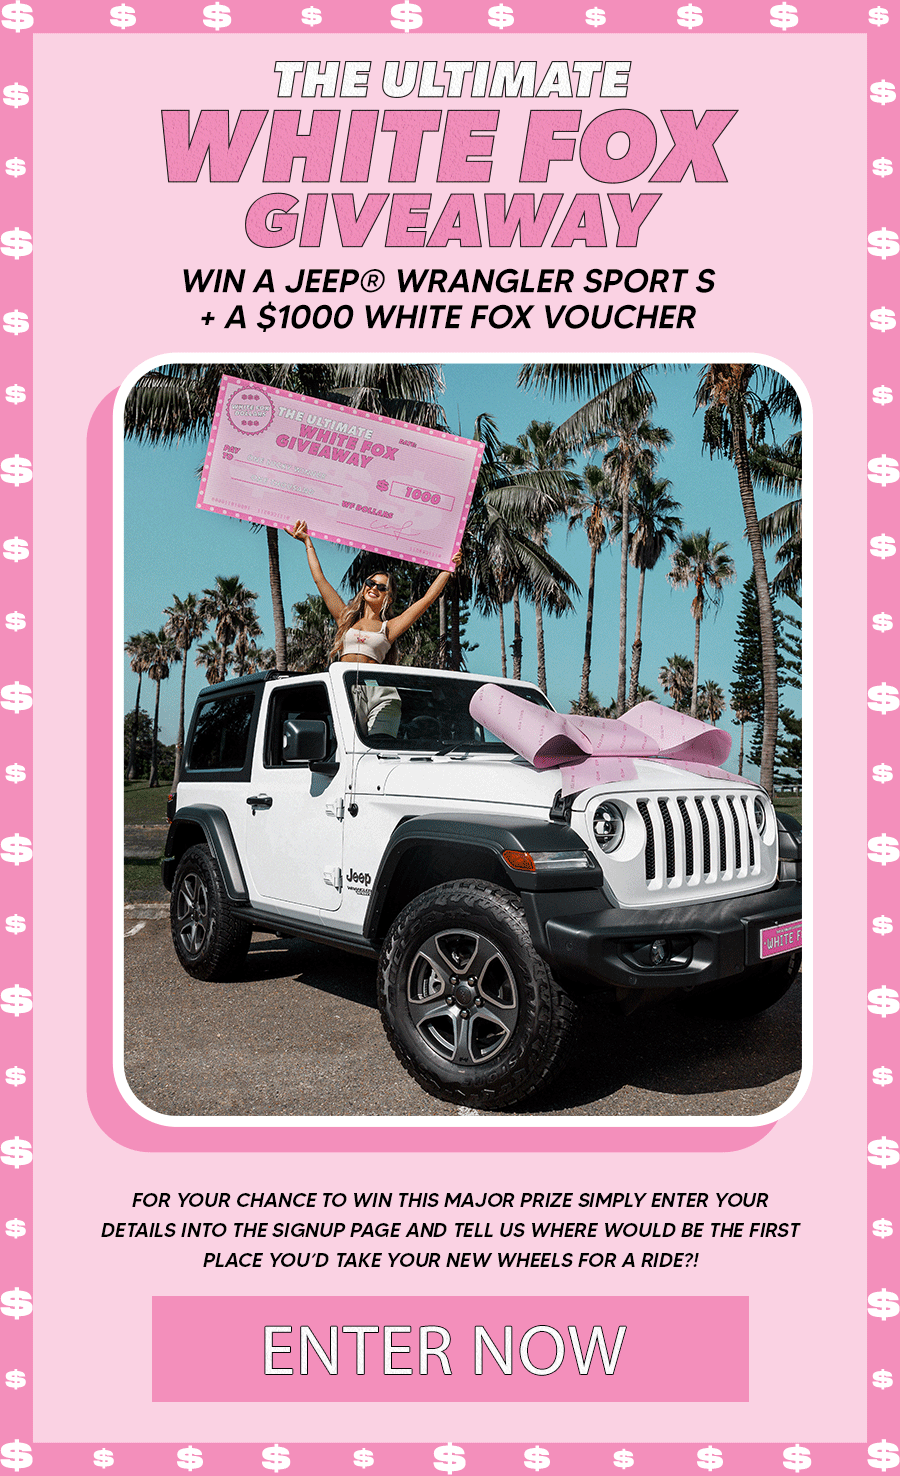 White Fox Boutique: WIN A JEEP WRANGLER + $1000 VOUCHER | Milled